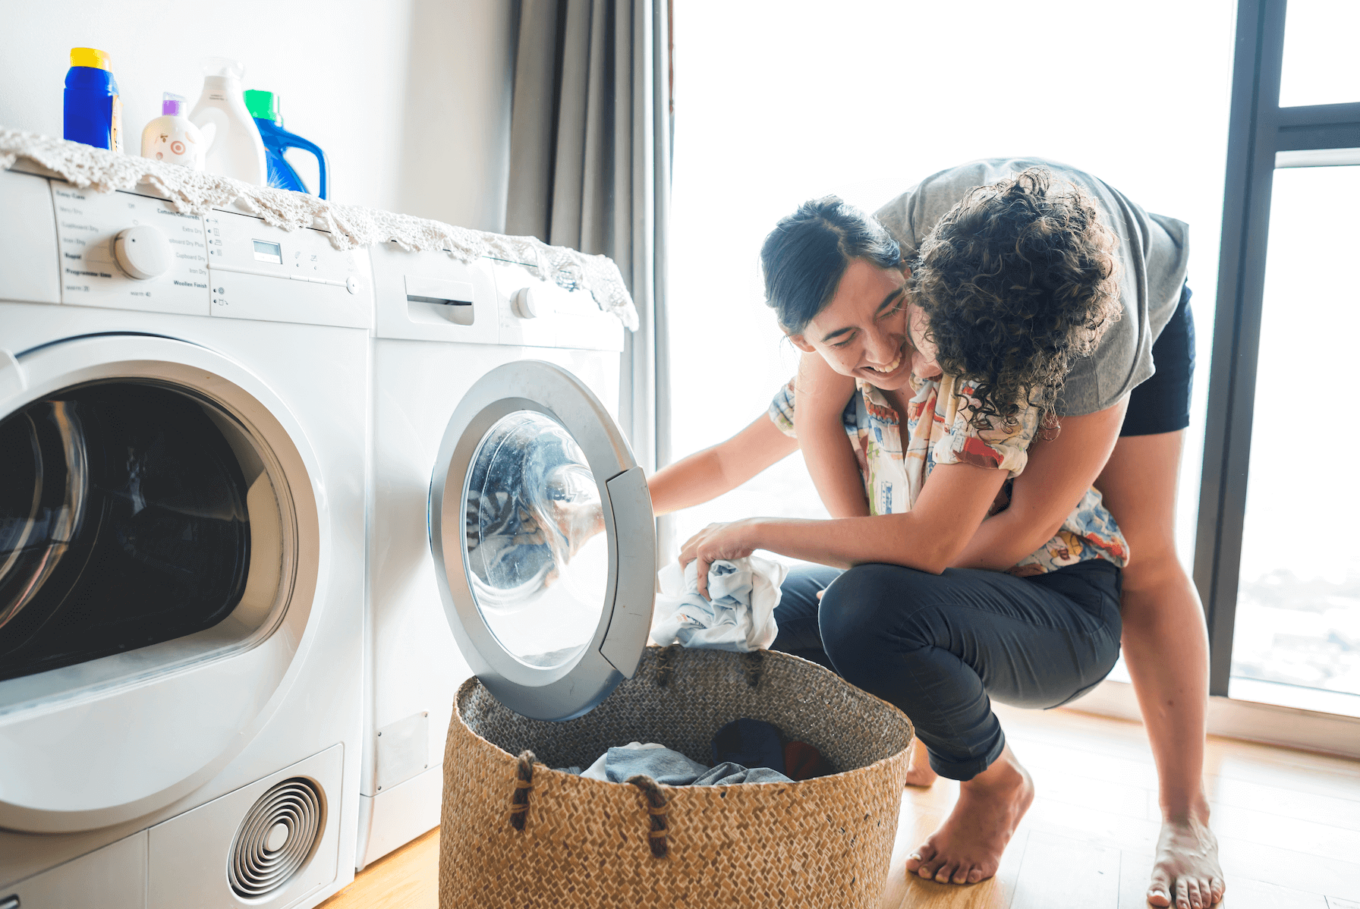 A photo from the 'authentic' collection, curated by our photo & video review teams. This photo depicts two women embracing in front of a washing machine.